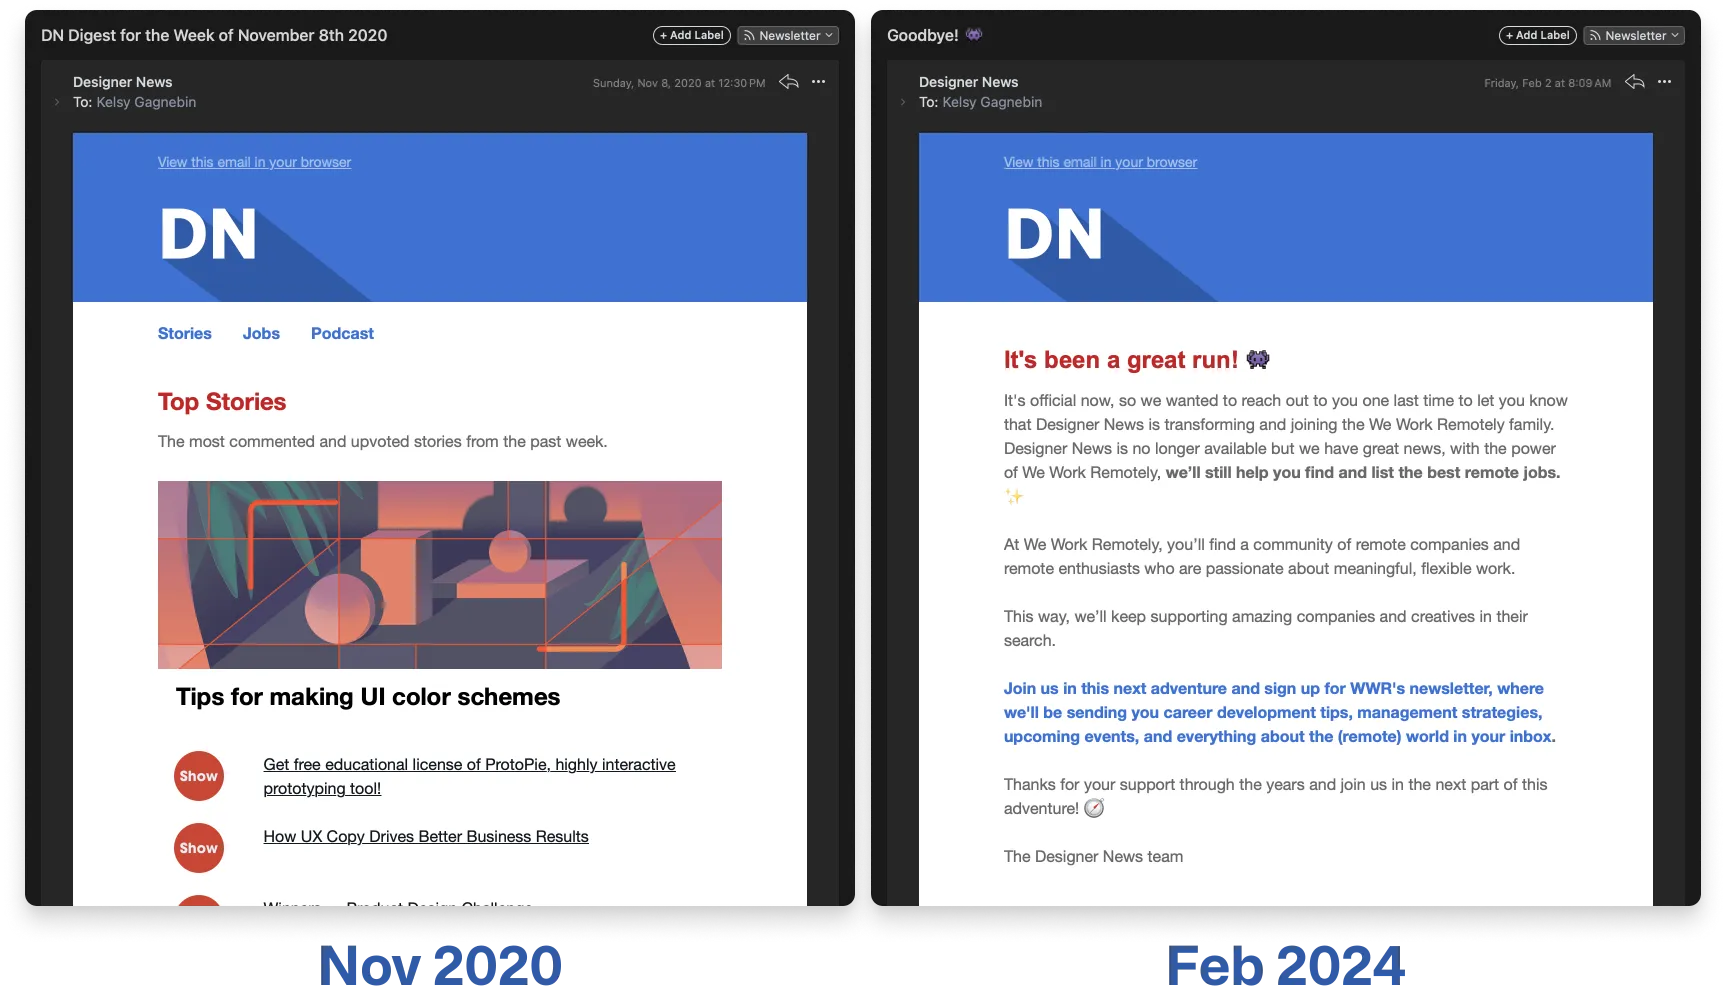 Two email newsletter interfaces side by side, contrasting a past issue from November 2020 with a farewell issue from February 2024. The 2020 newsletter showcases top stories and UI color scheme tips, while the 2024 newsletter announces Designer News joining 'We Work Remotely' and includes links to a newsletter for career development tips and remote work events.